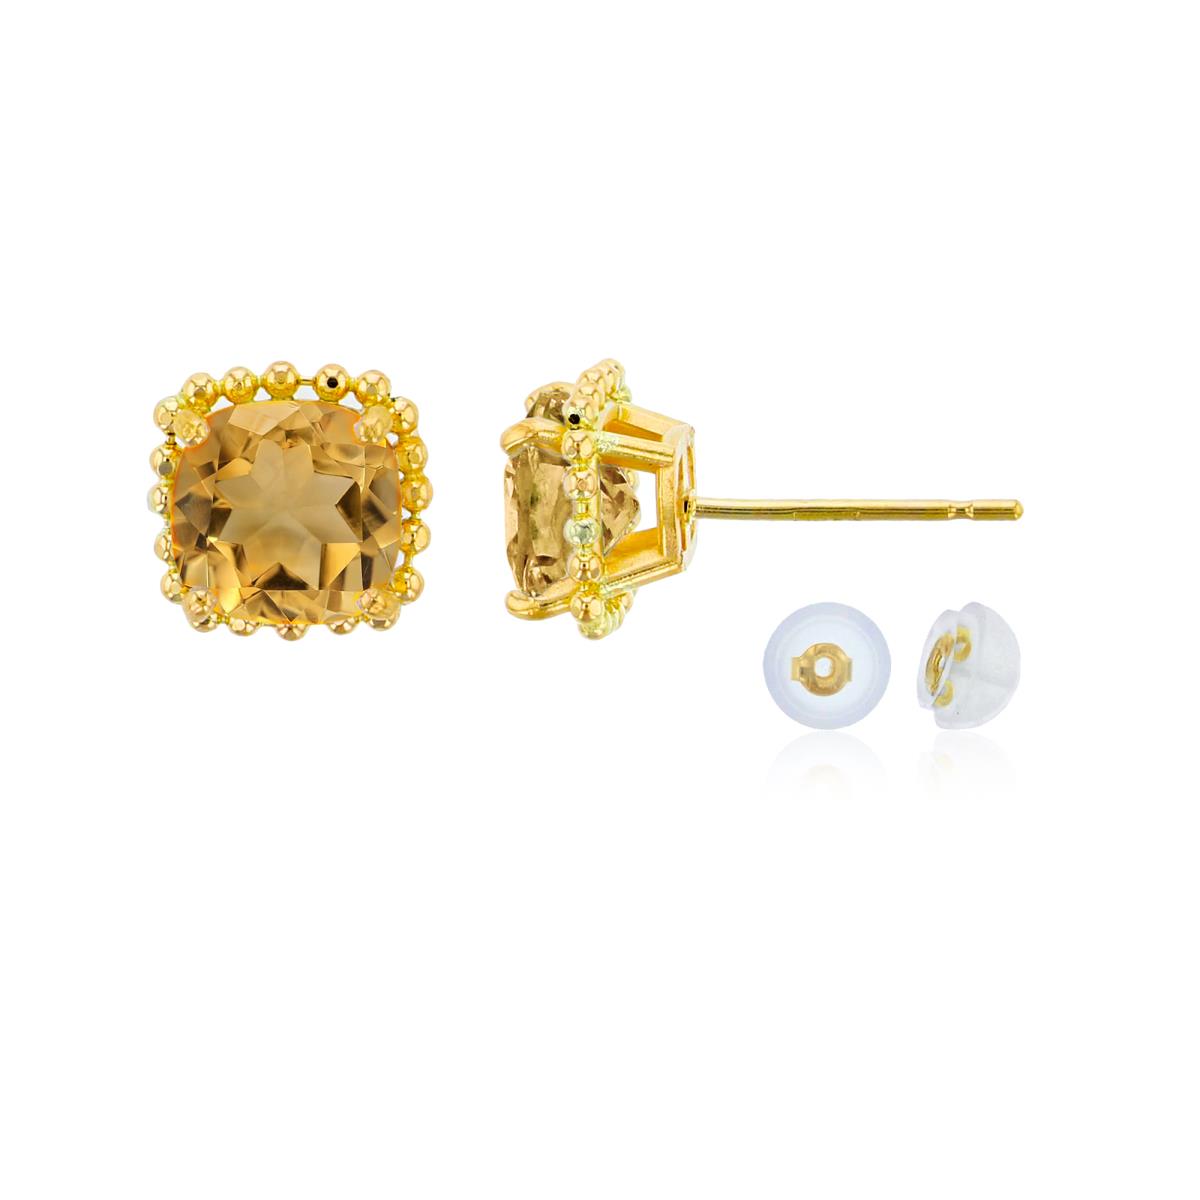 10K Yellow Gold 6x6mm Cushion Cut Citrine Bead Frame Stud Earring with Silicone Back